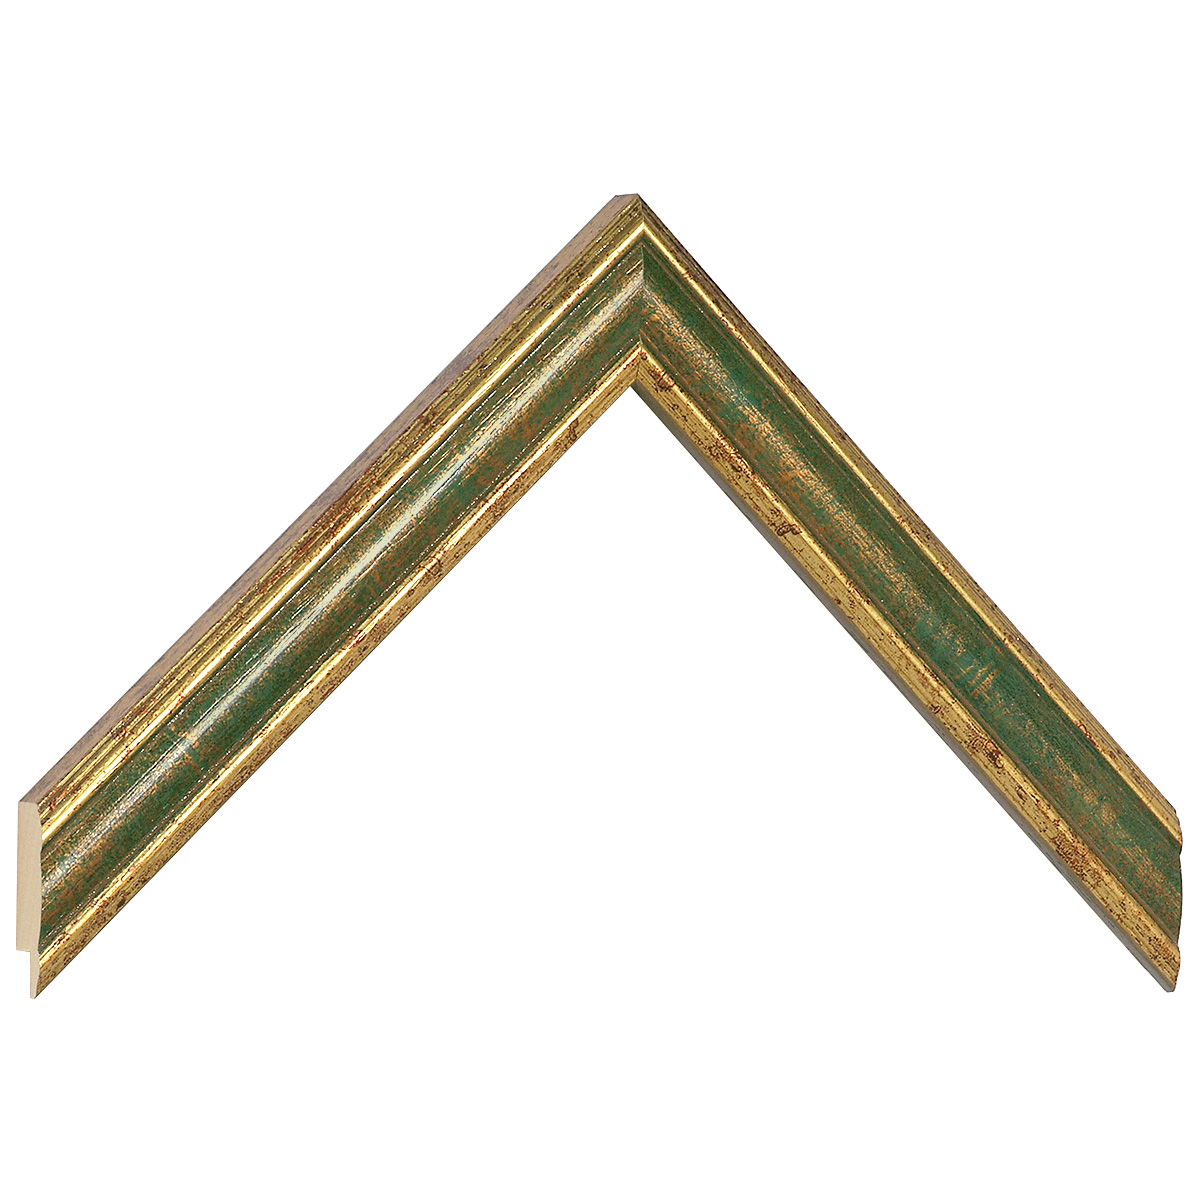 Moulding ayous jointed 24mm - antique gold with green band - Sample